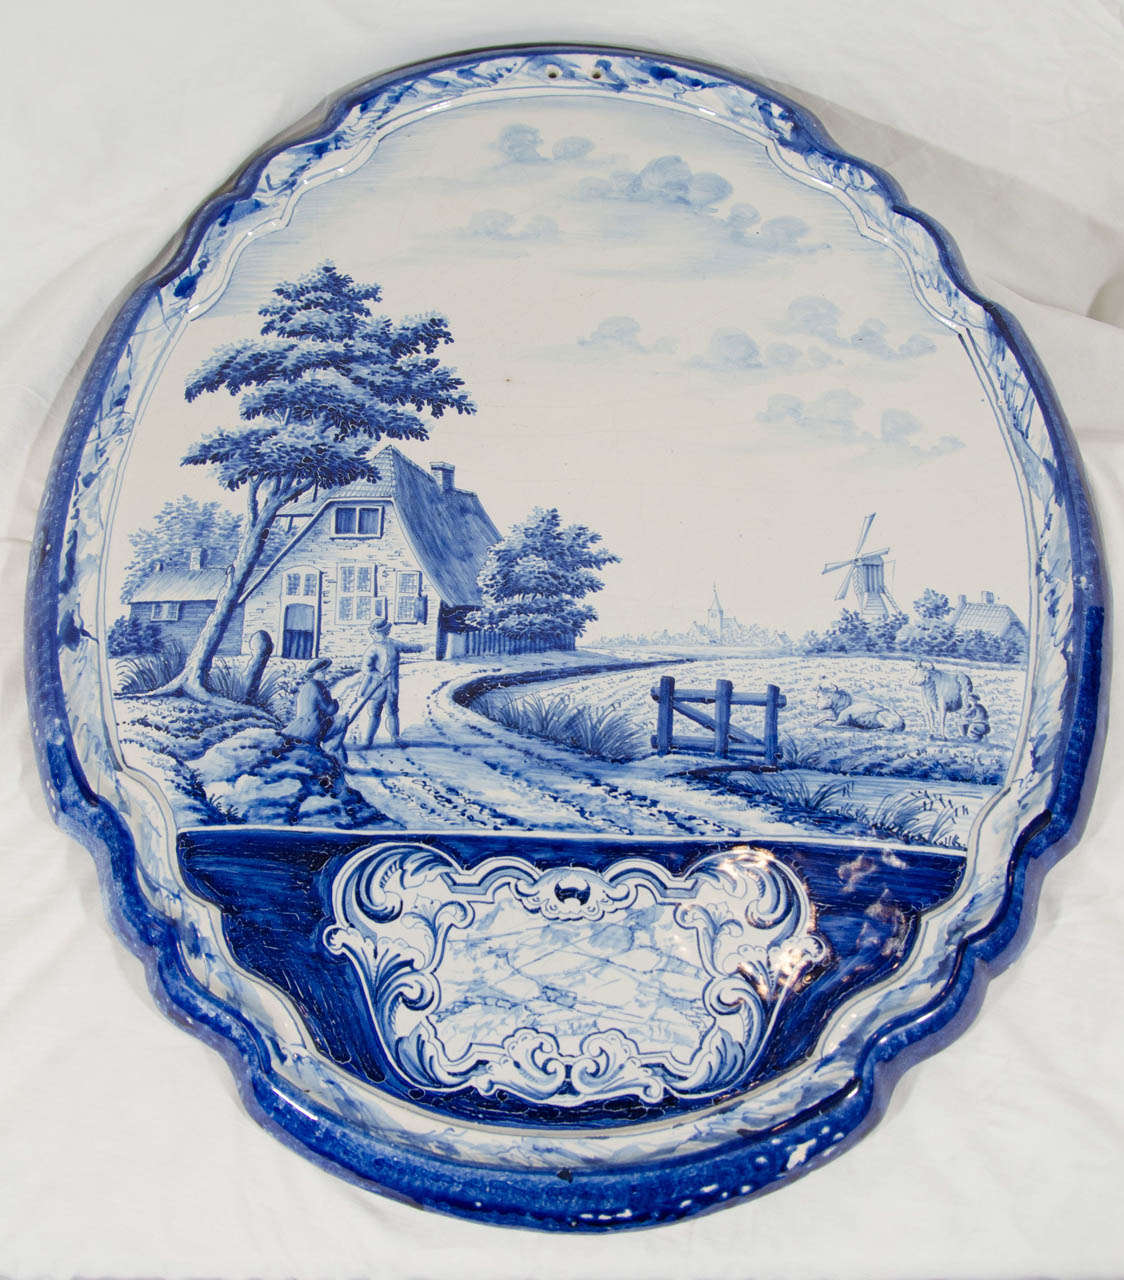 A large oval plaque painted in cobalt blue with a narrative scene of 2 gentlemen walking roadside, a cottage, a fence, and a field with cows. 
The plaque is pierced with two suspension holes for hanging.